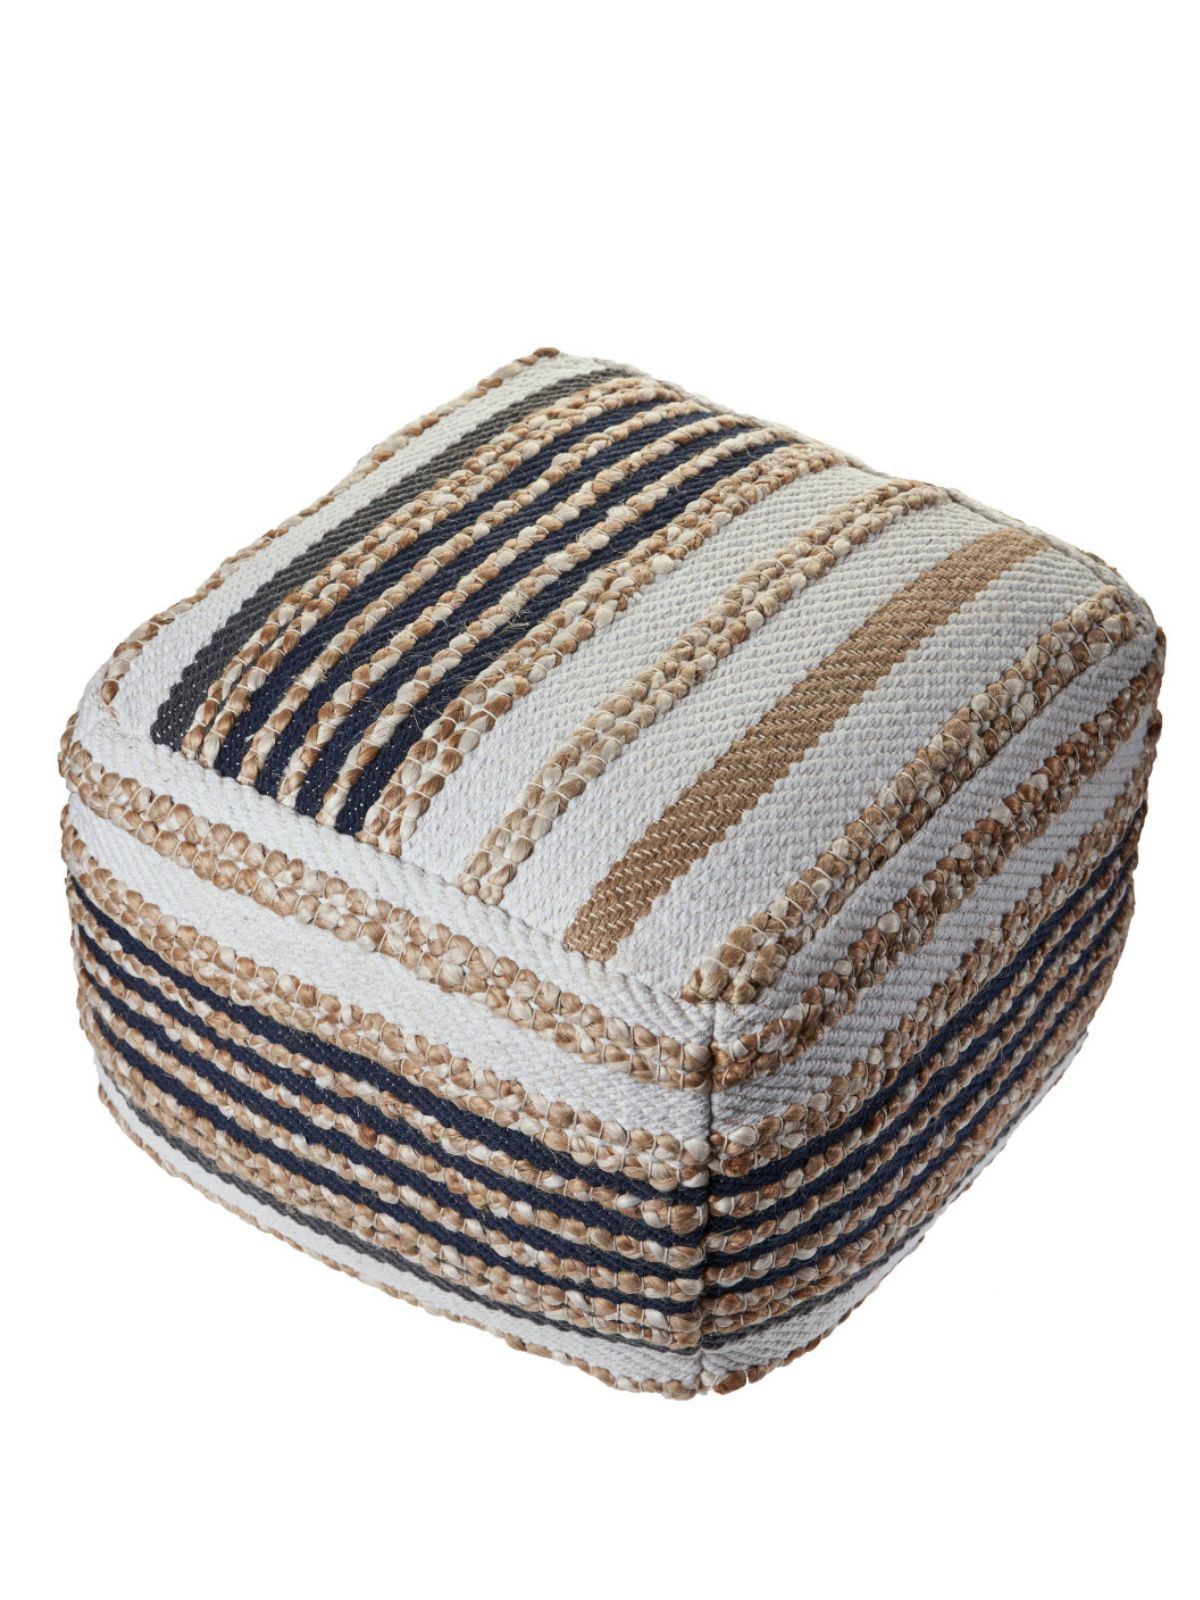 Our pouf collection is made to bring versatility into a space without sacrificing style.